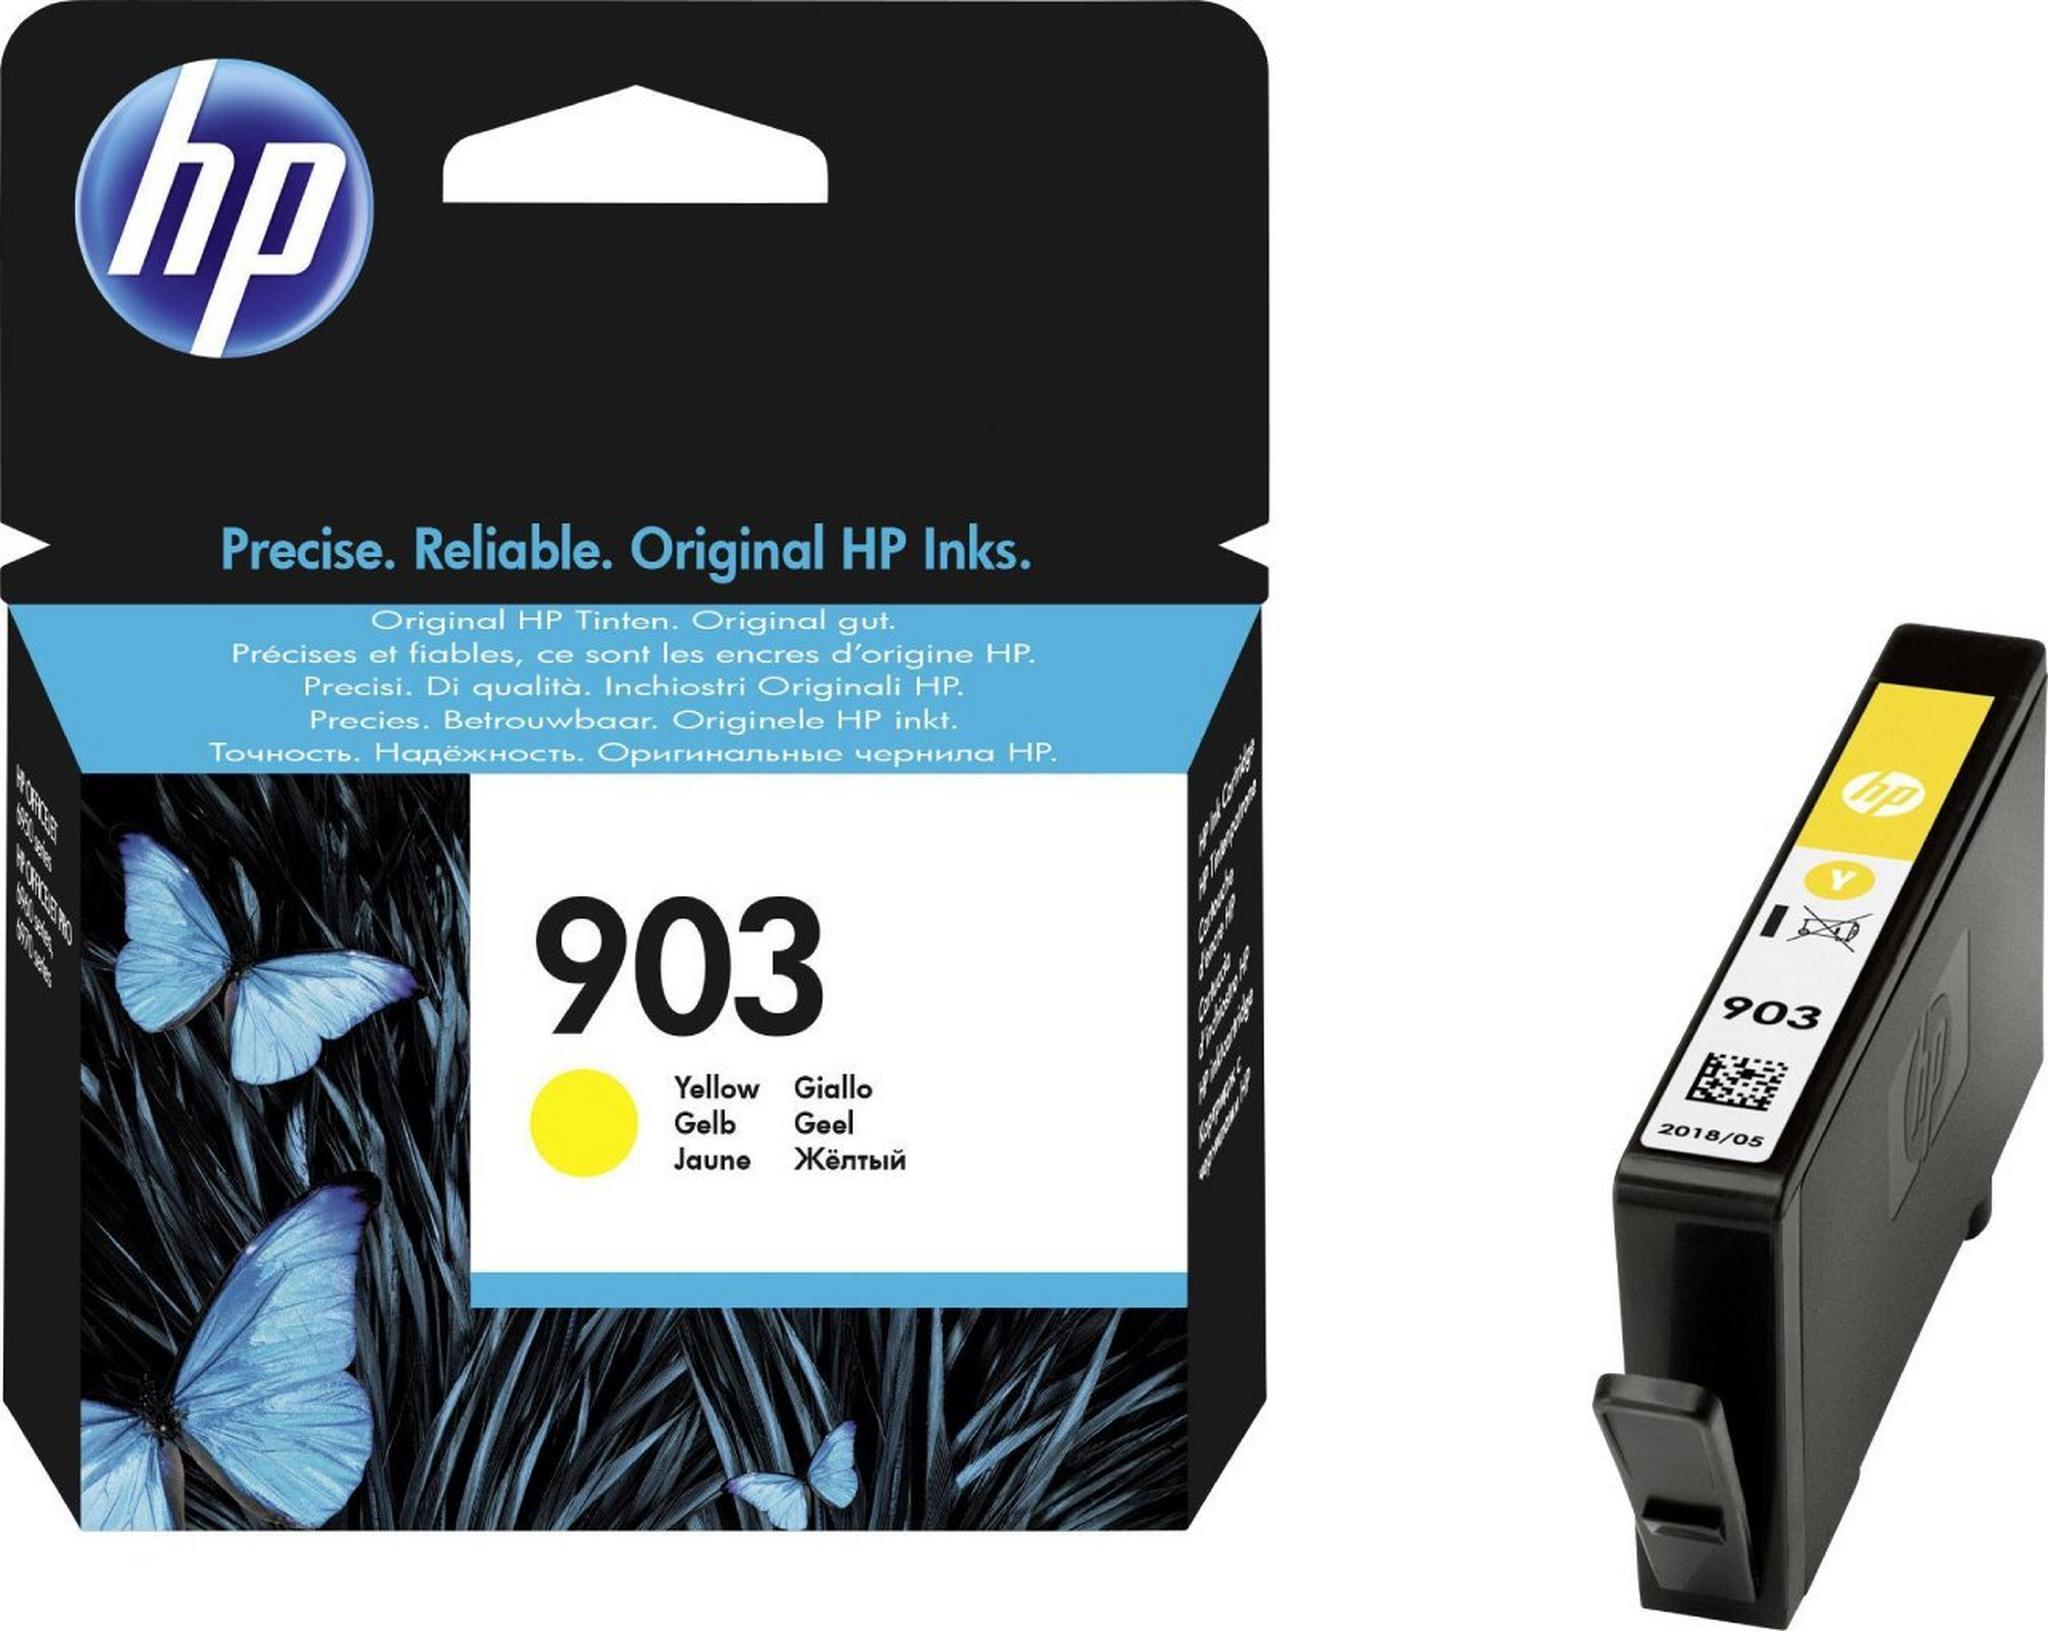 HP Ink 903 Yellow Ink